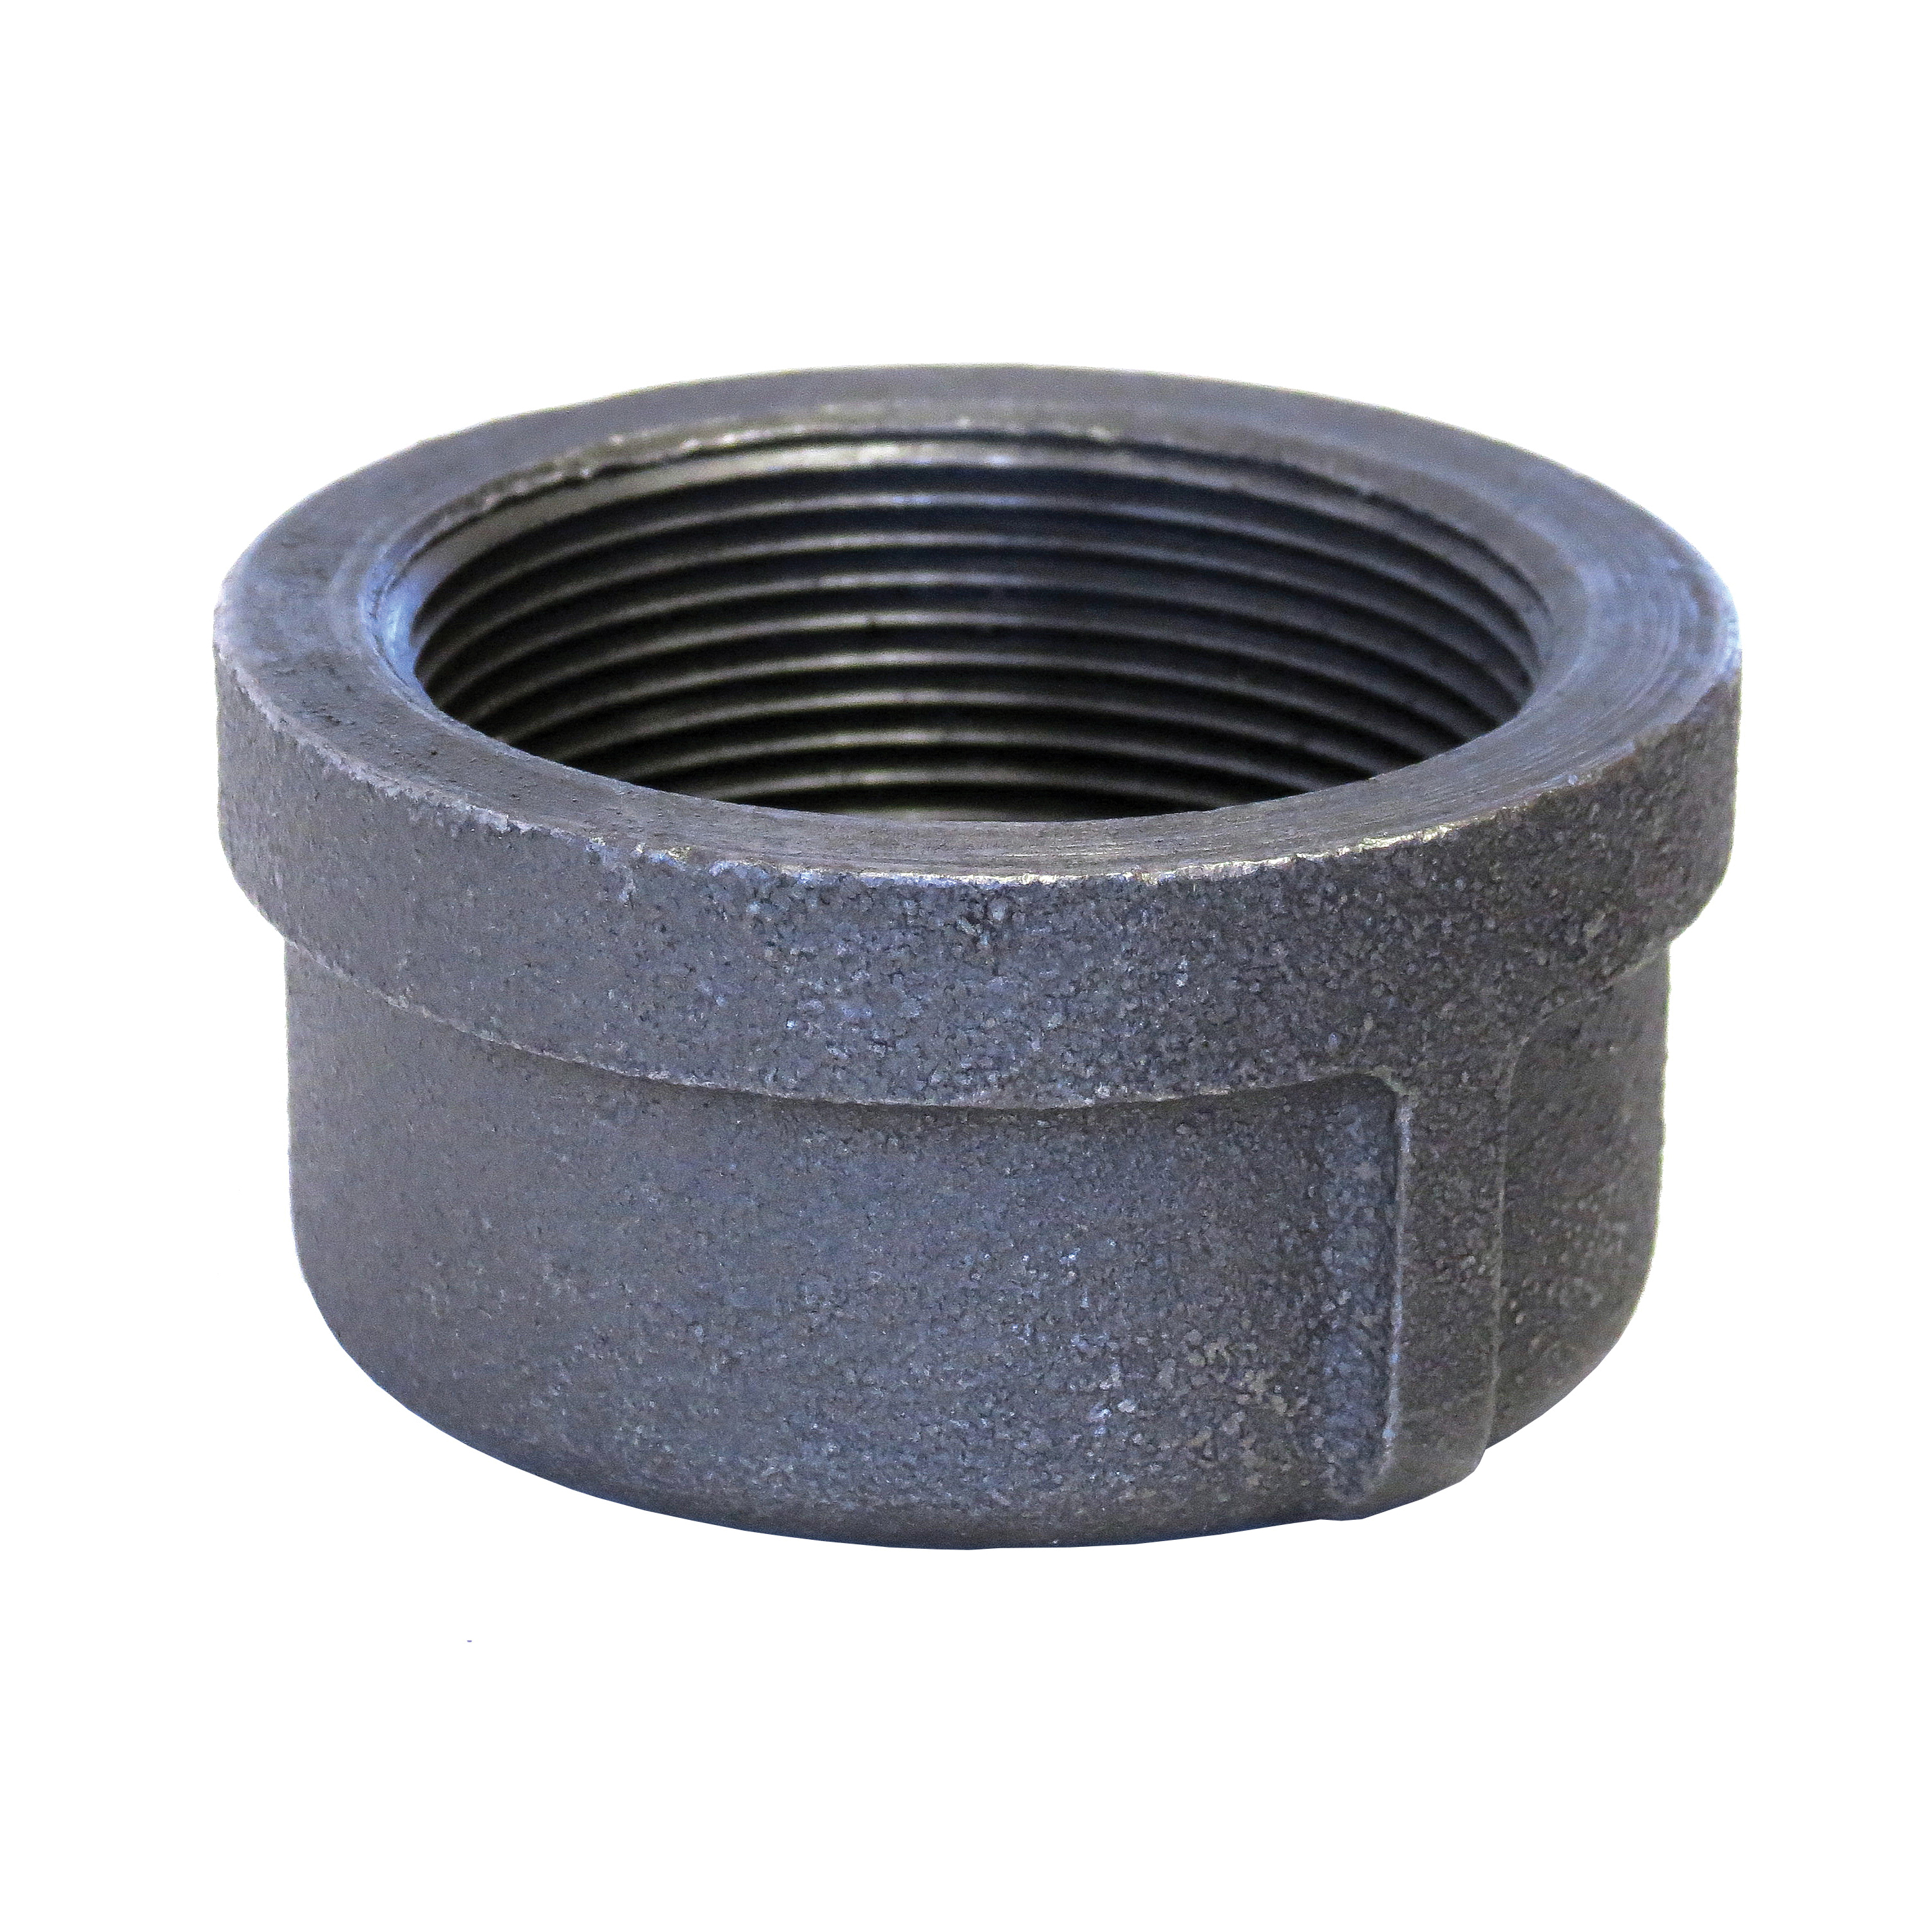 Anvil® 0319900726 FIG 1124 Standard Pipe Cap, 2 in Nominal, FNPT End Style, 150 lb, Malleable Iron, Galvanized, Domestic